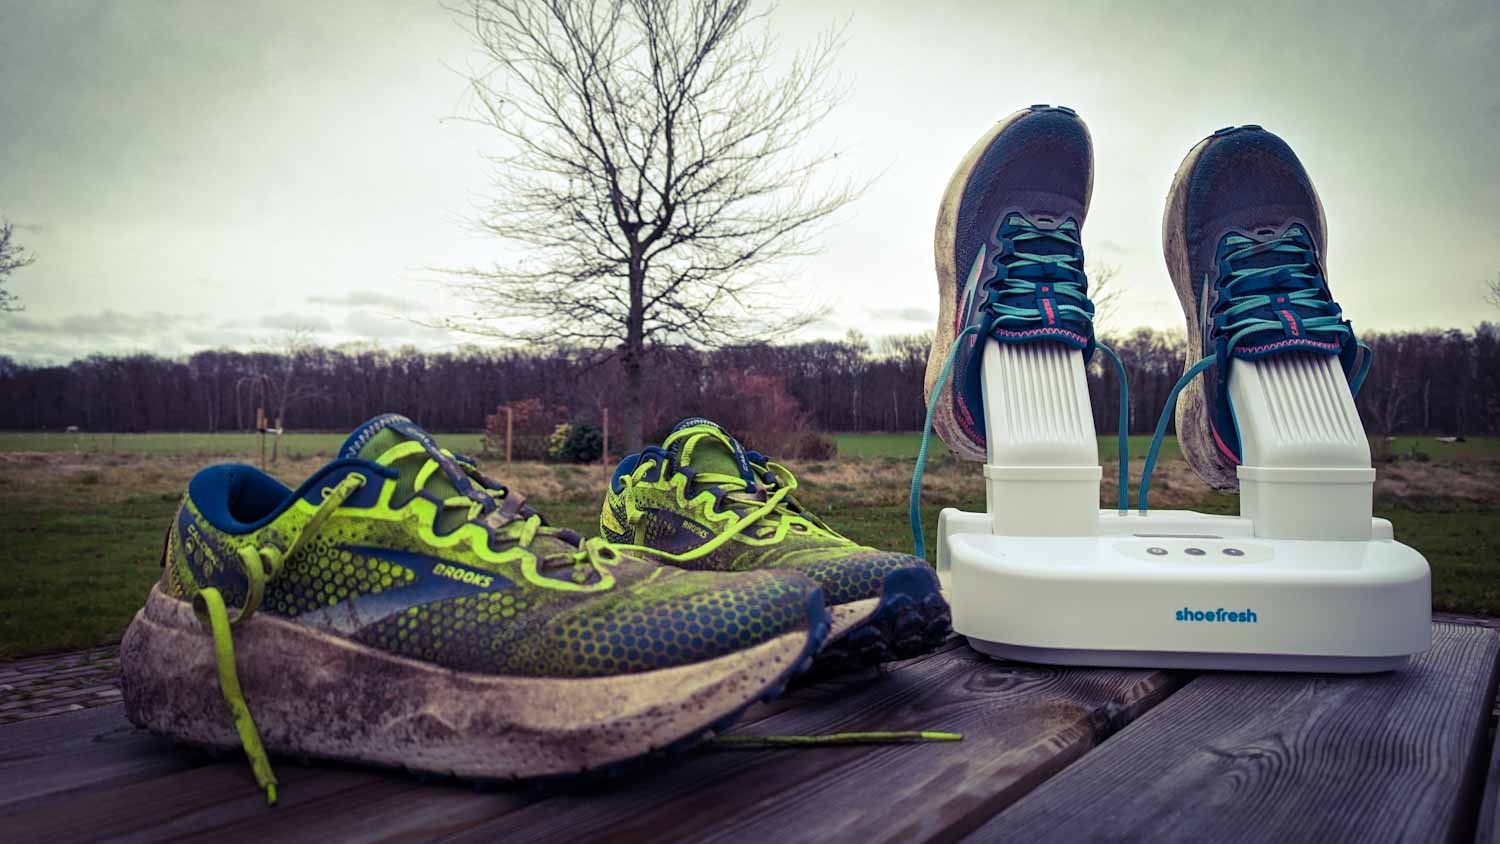 I never heard of a Shoefresh shoe freshener, and dryer, but having wet and smelly running shoes, I decided to put it to the test. A review